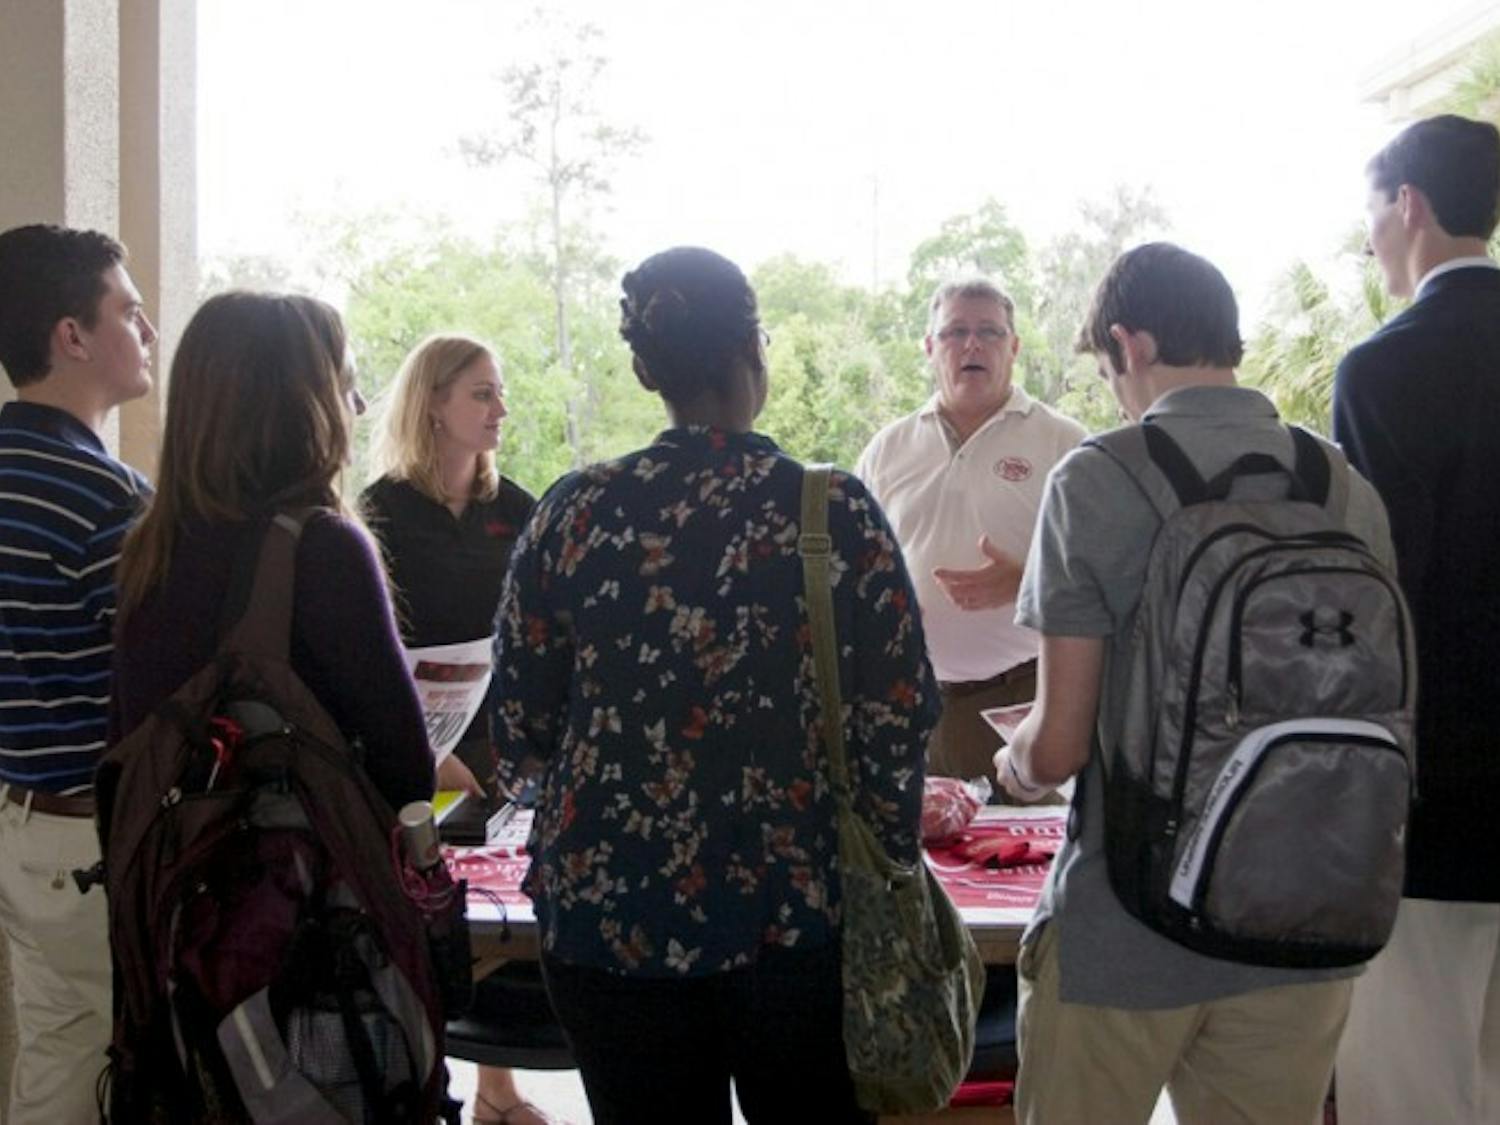 Sales and Marketing Representative Joy Richie and Regional Sales Manager Robbie Jones of Cheerwine describe the perks of being a Cheerwine campus ambassador on Thursday afternoon at the summer job and internship fair.